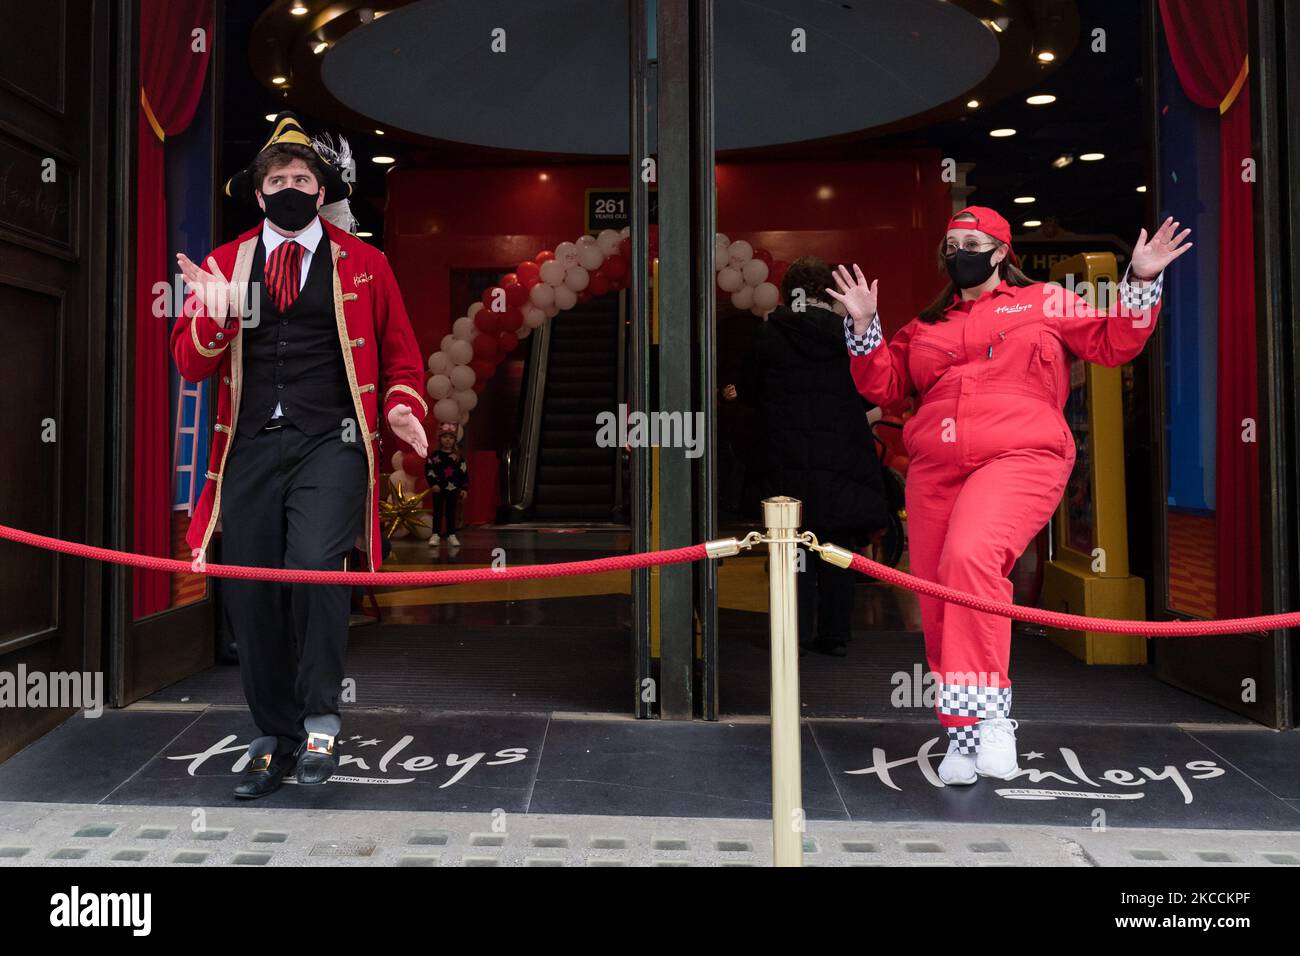 LONDON, UNITED KINGDOM - APRIL 12, 2021: Staff wearing fancy dress dance outside Hamleys toy store on Regent Street as shops open their premises to customers after being closed for over three months under coronavirus lockdown, on 12 April, 2021 in London, England. From today the next stage of lifting lockdown restrictions goes ahead with pubs and restaurants allowed to serve food and drinks outdoors, opening of non-essential shops, hairdressers, beauty salons and gyms in England. (Photo by WIktor Szymanowicz/NurPhoto) Stock Photo